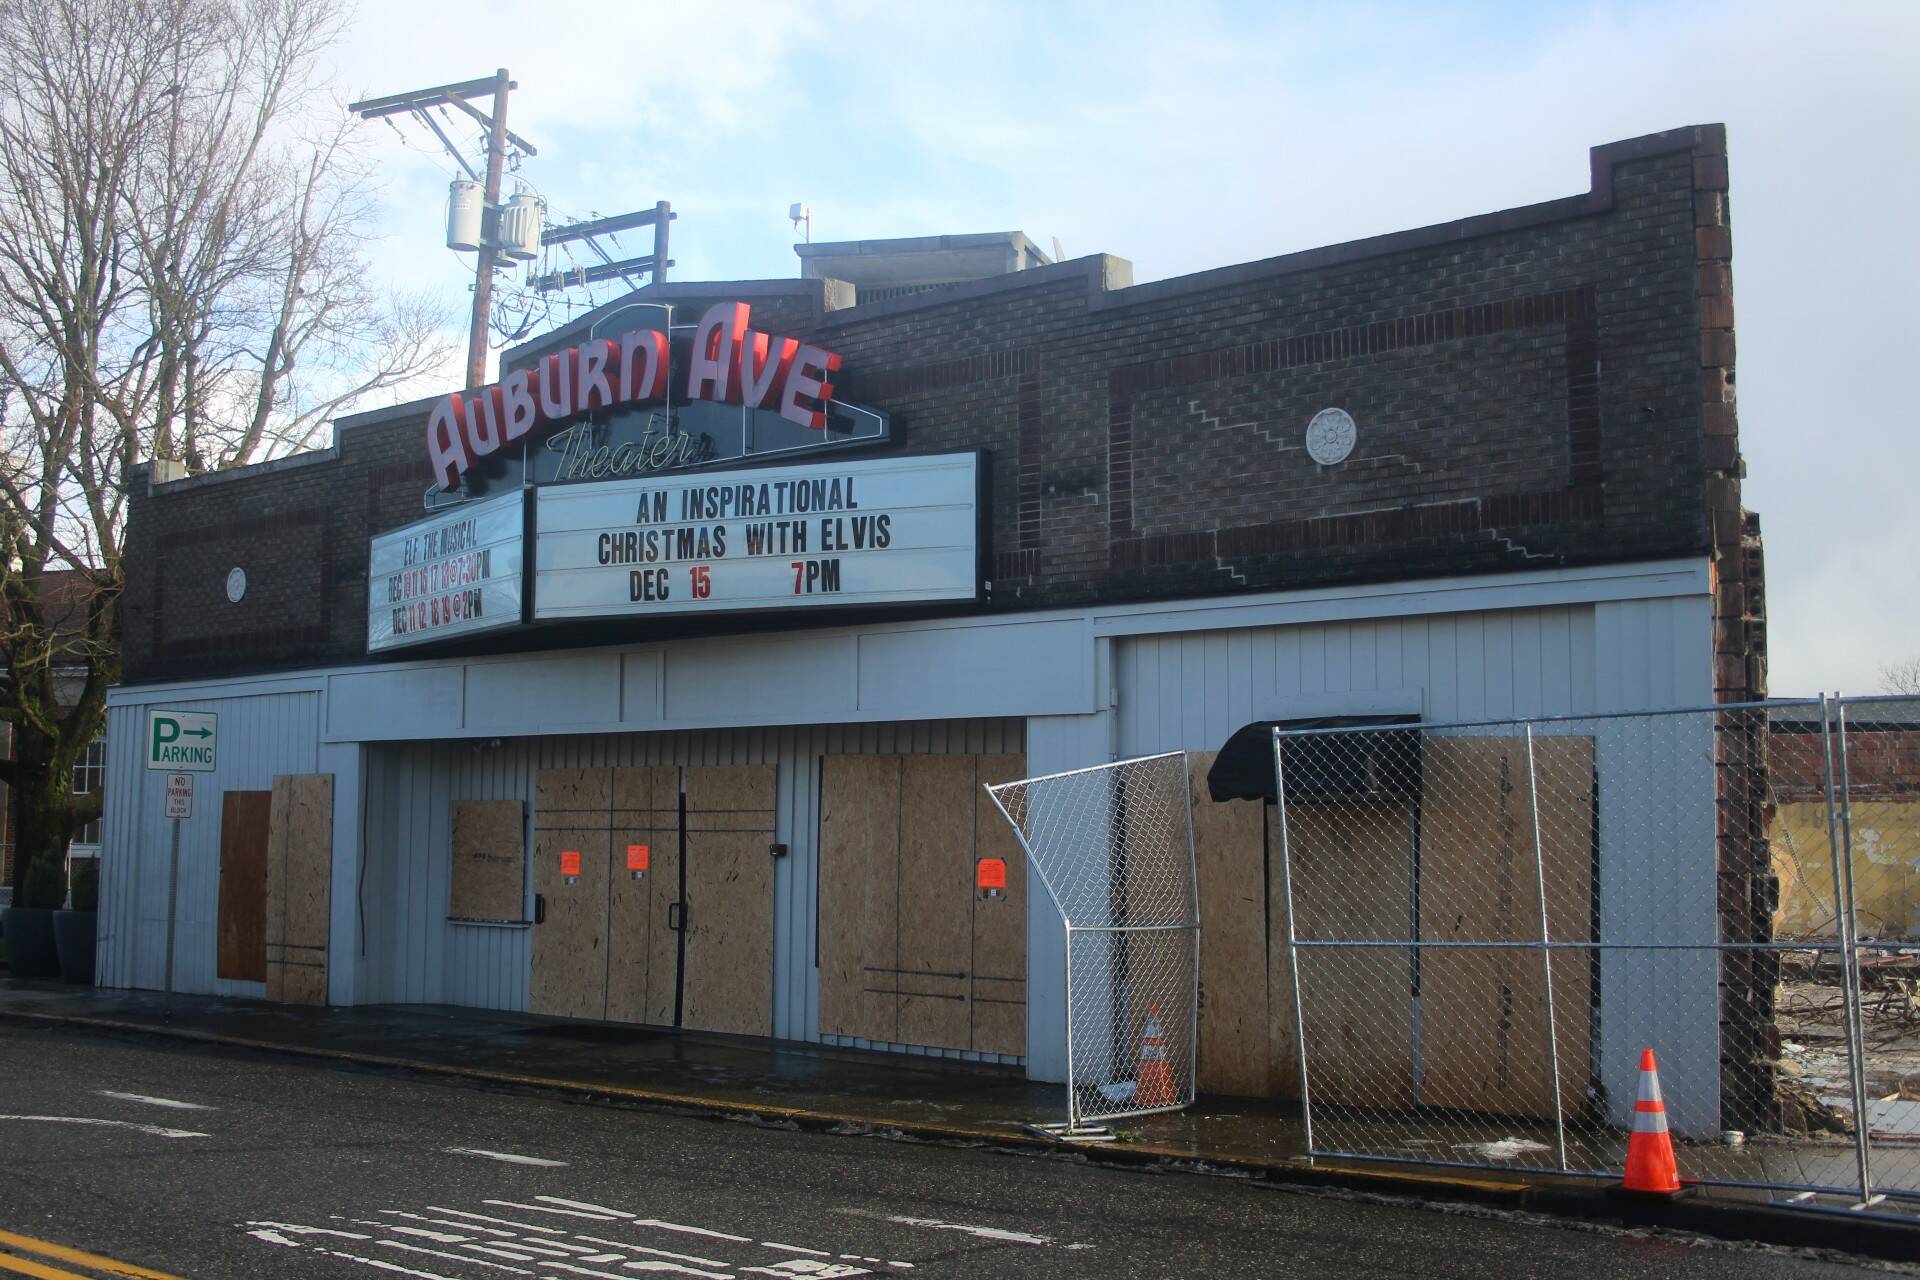 The Auburn Avenue Theater sits vacant and boarded up on Jan. 3, 2022, after being condemned due to safety concerns stemming from the demolition of the Max House Apartments complex next door. Photo by Henry Stewart-Wood/Sound Publishing